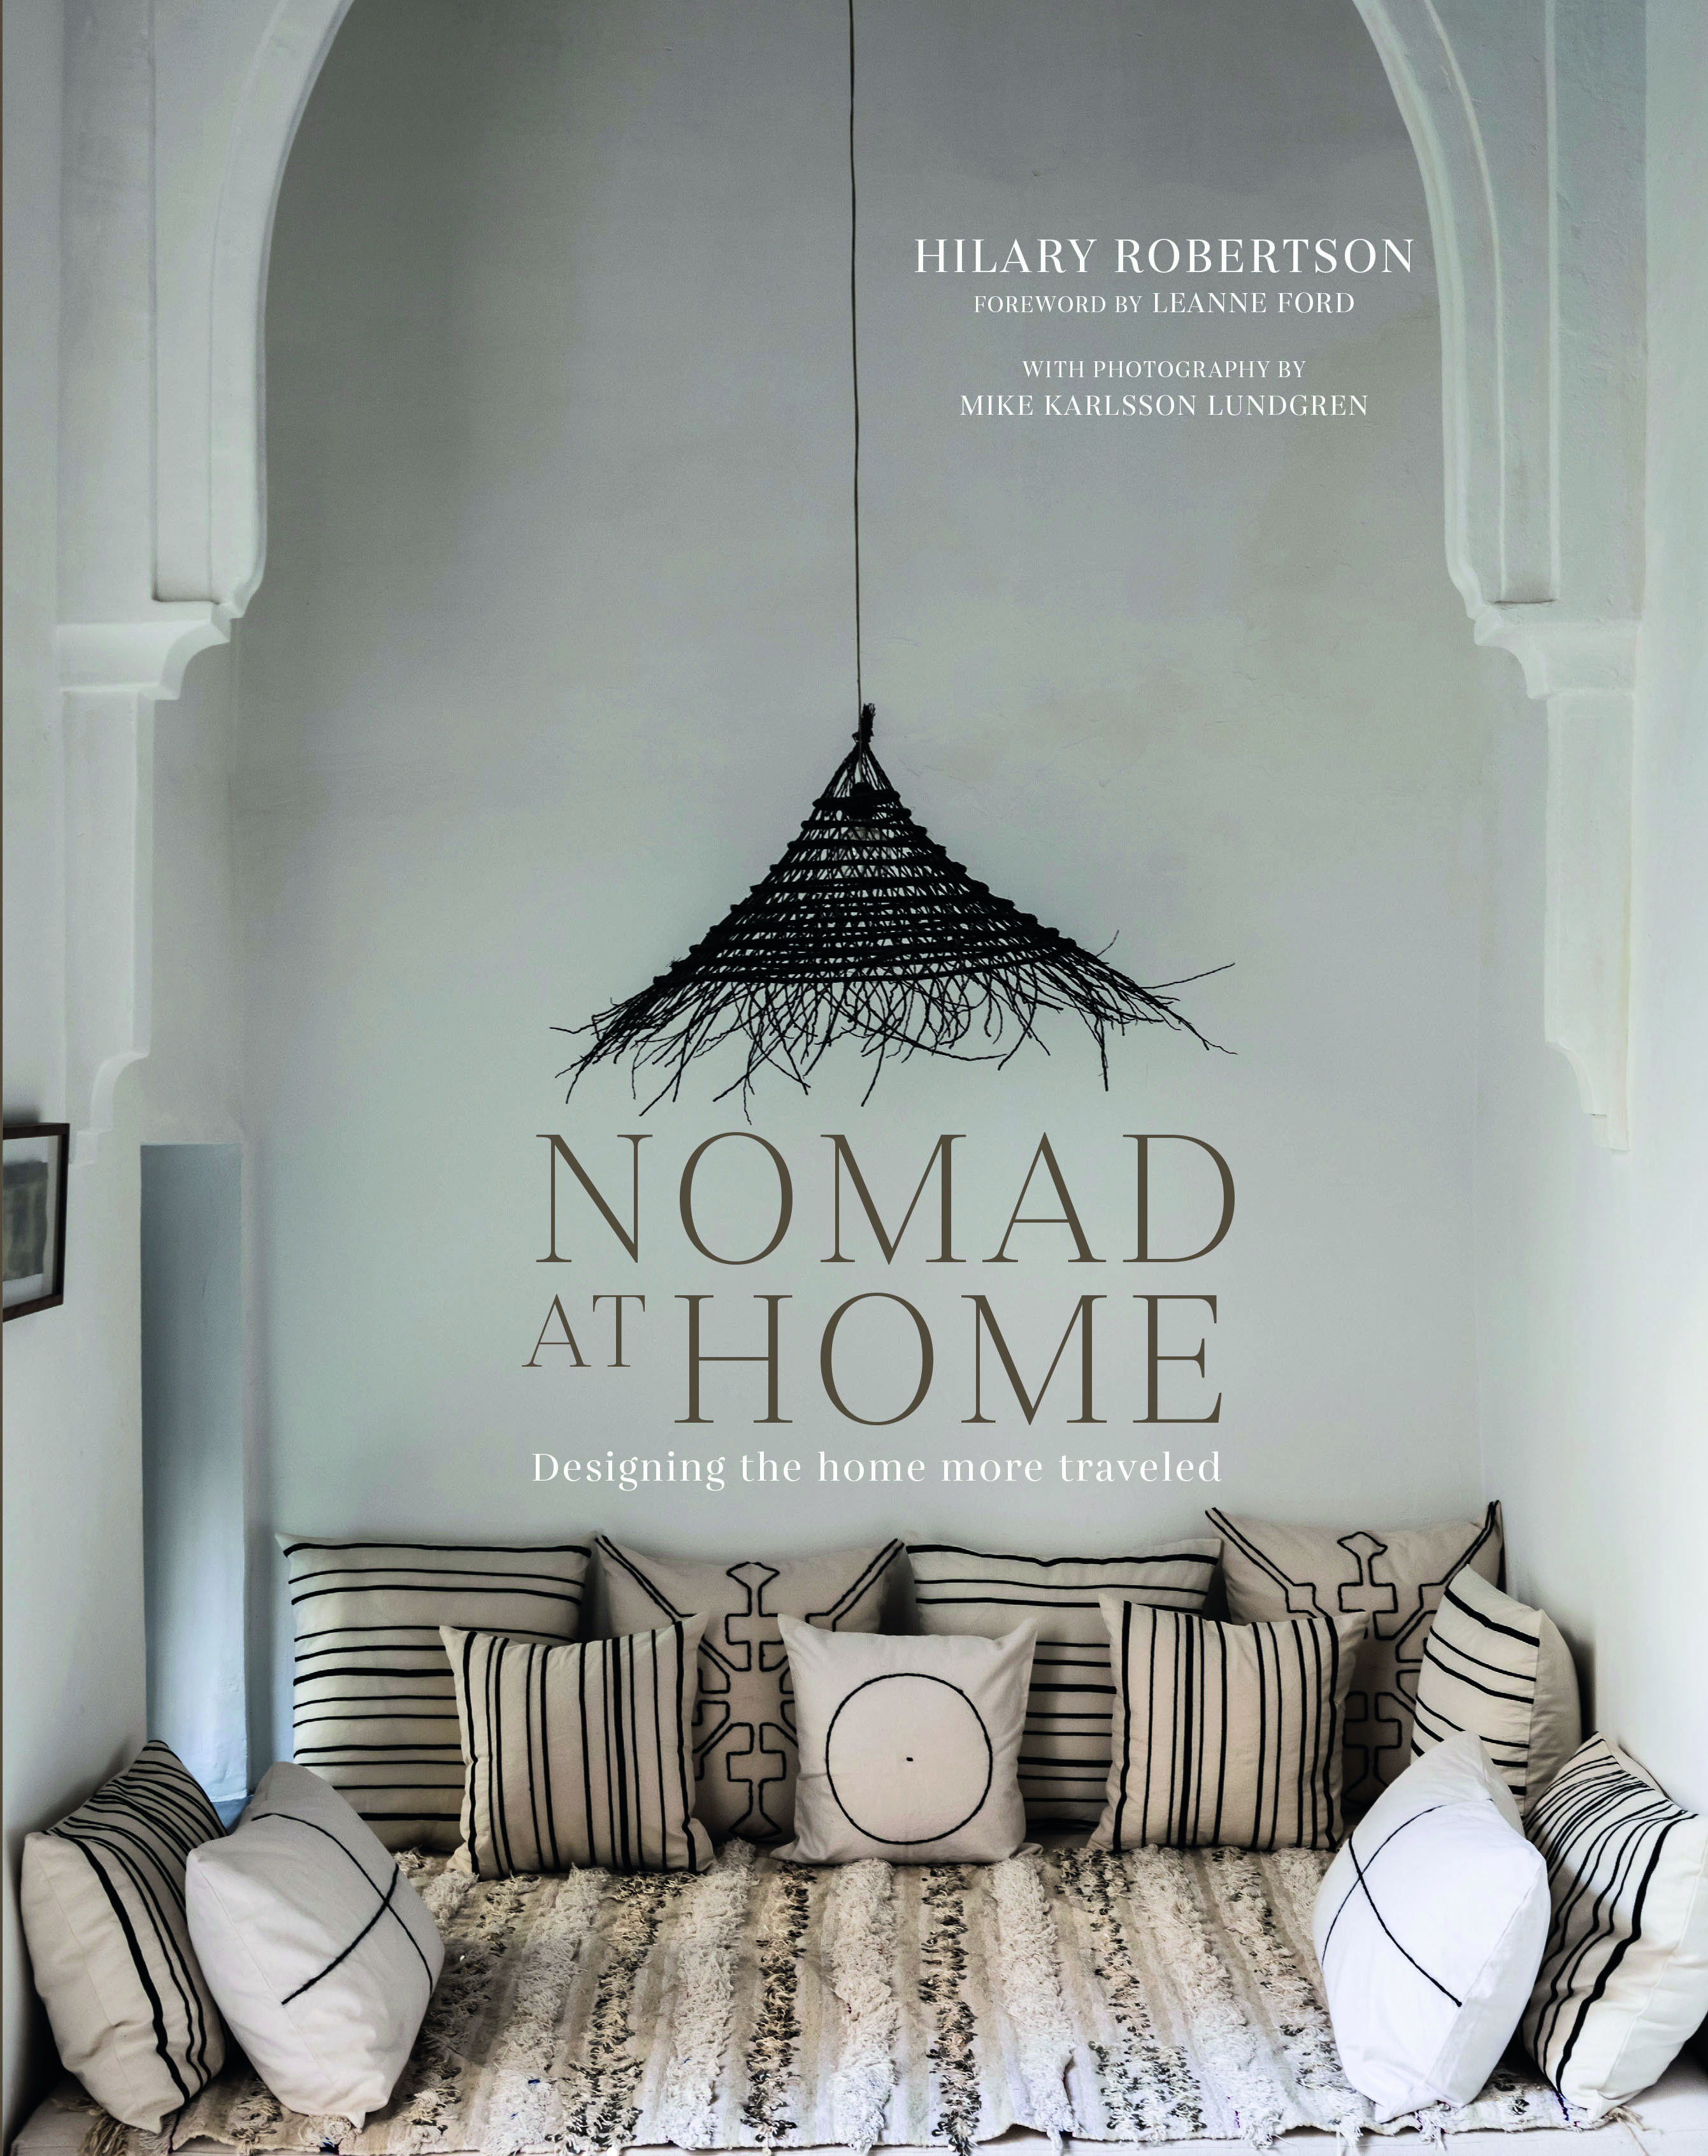 Book jacket for Nomad at Home